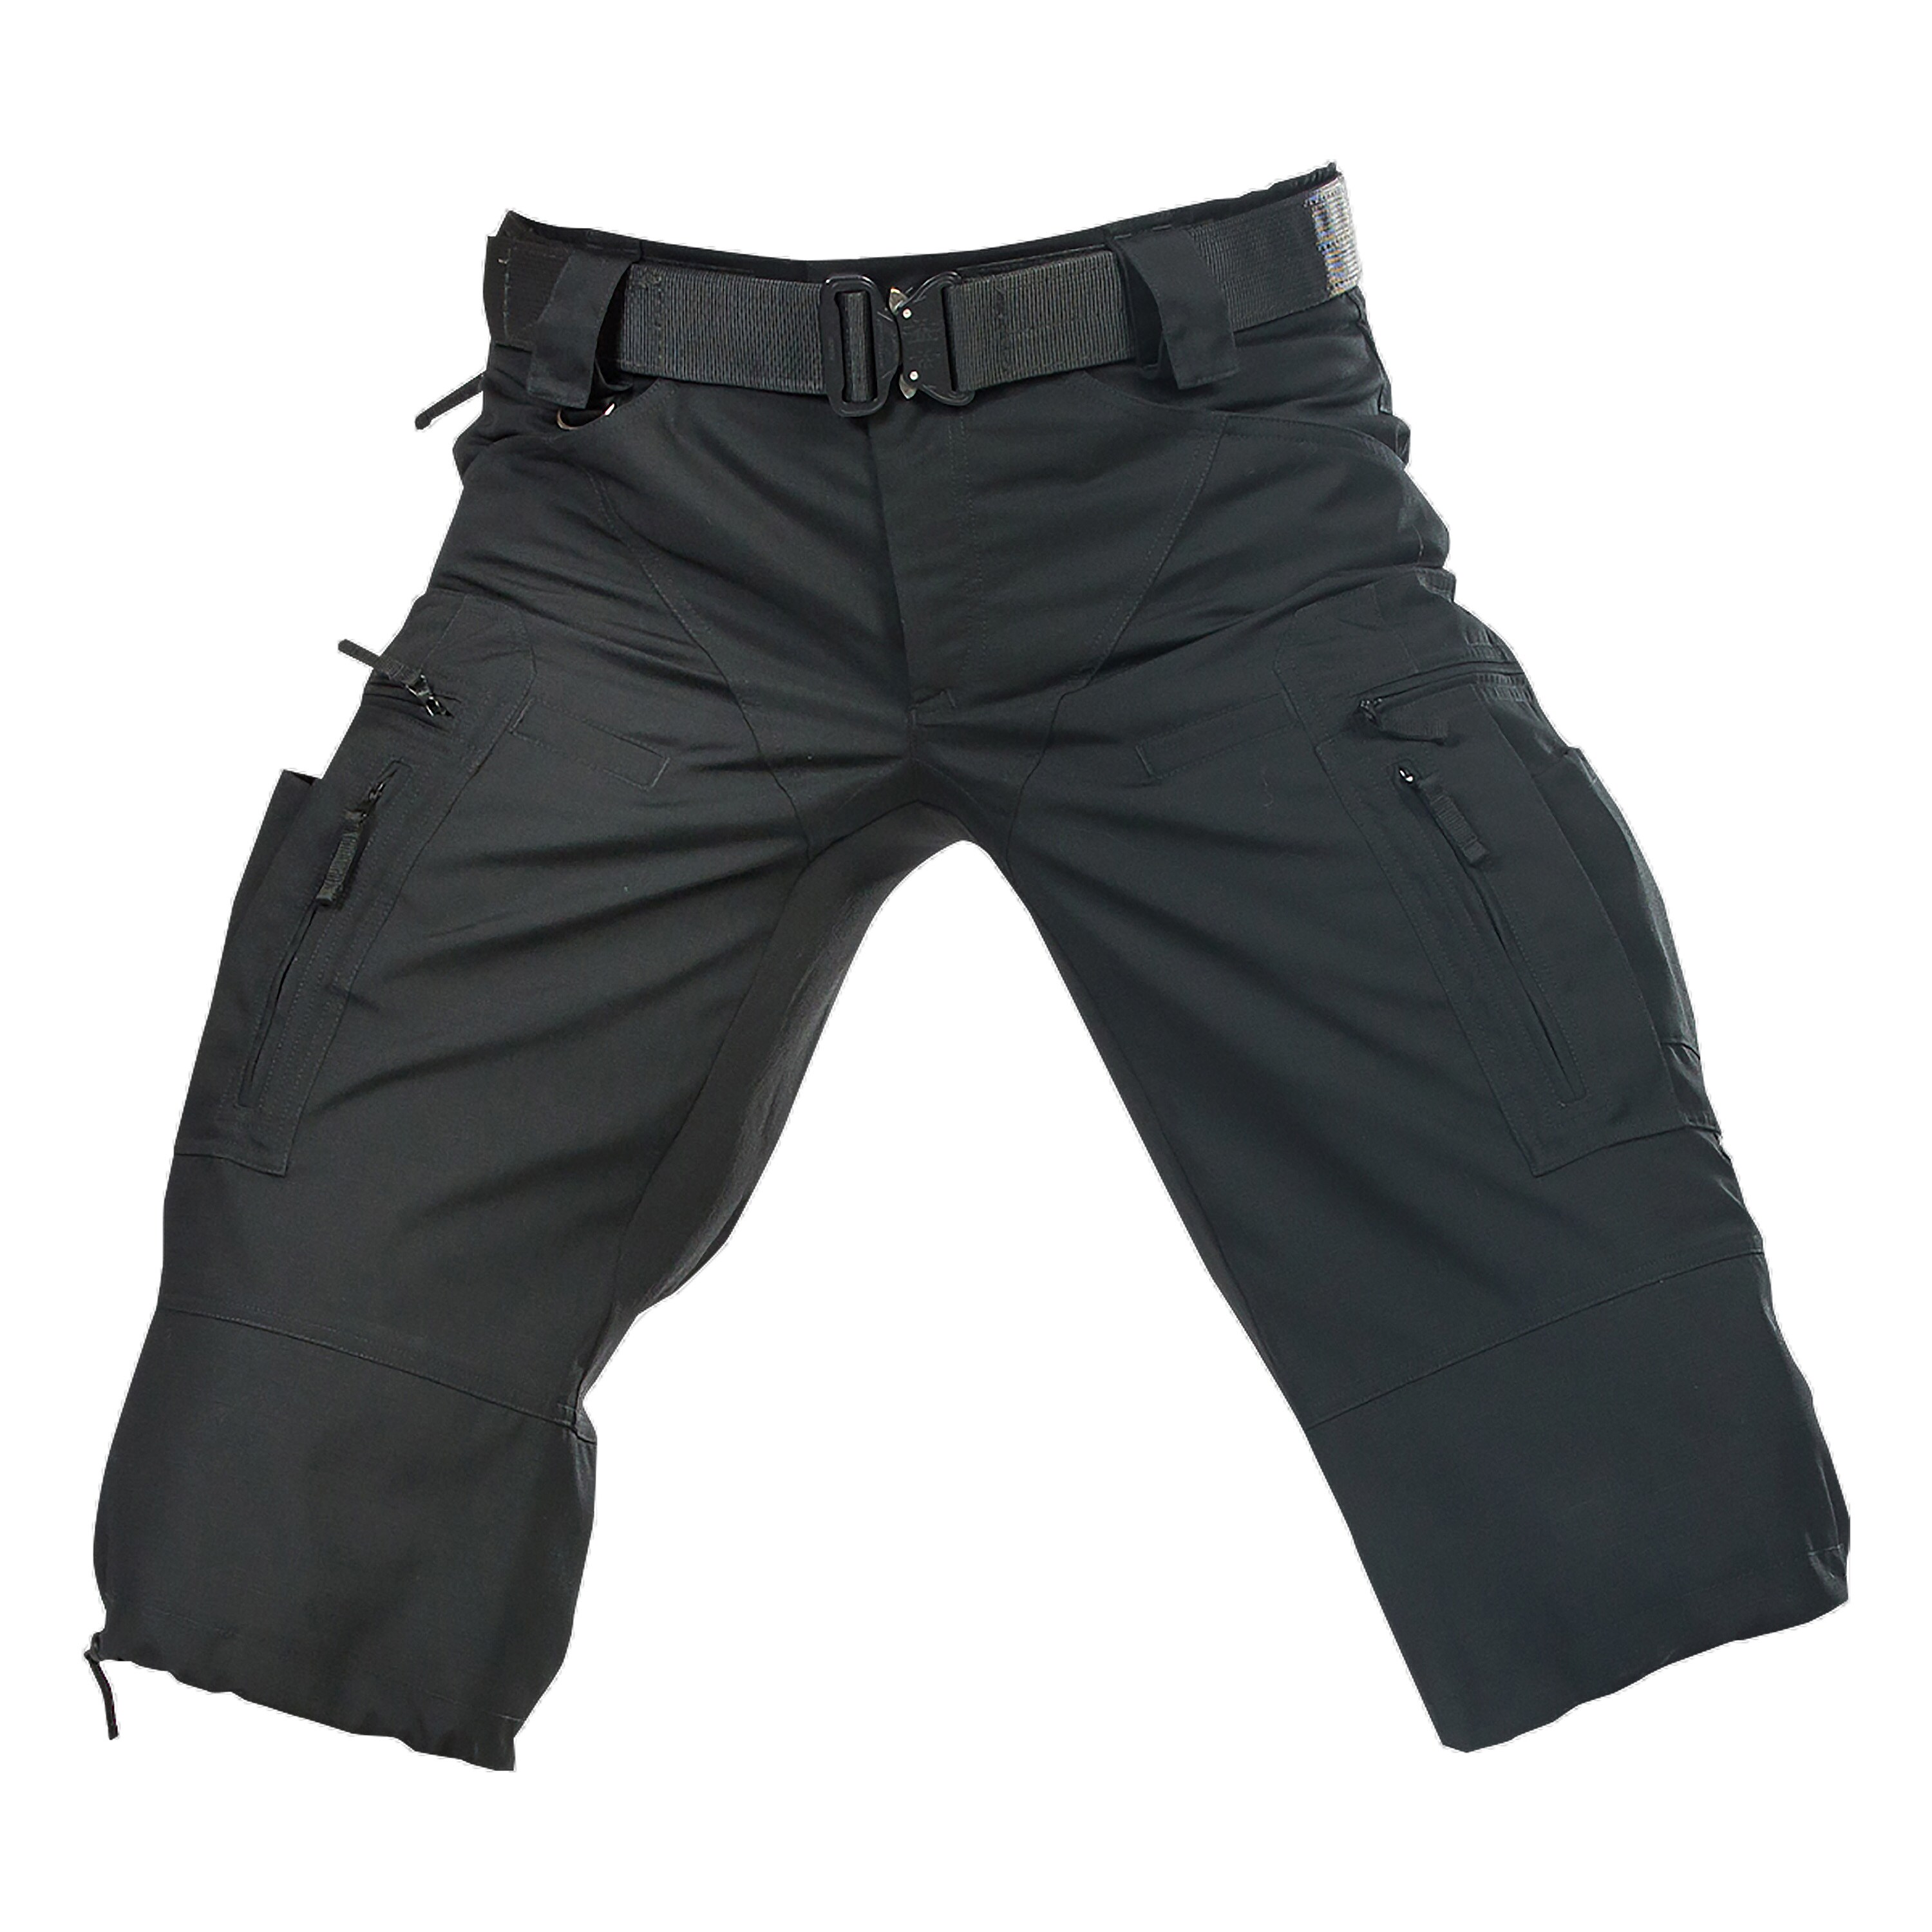 Purchase the UF Pro Short P-40 Tactical black by ASMC